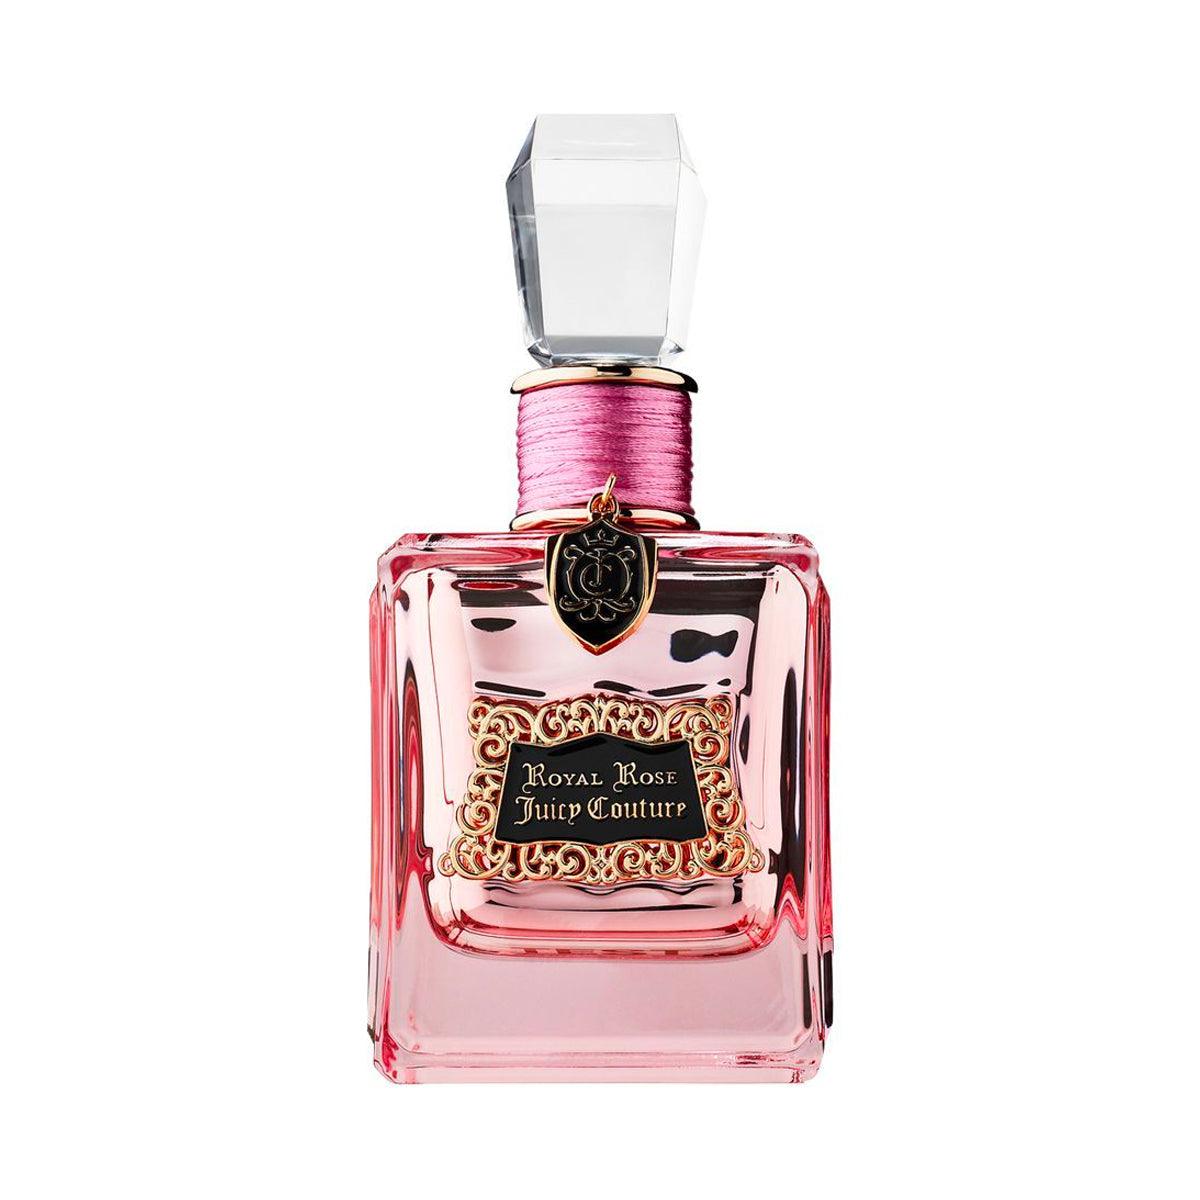 Juicy Couture Middle East Royal Rose Edp Spray 100ml-Perfume - Allurebeautypk